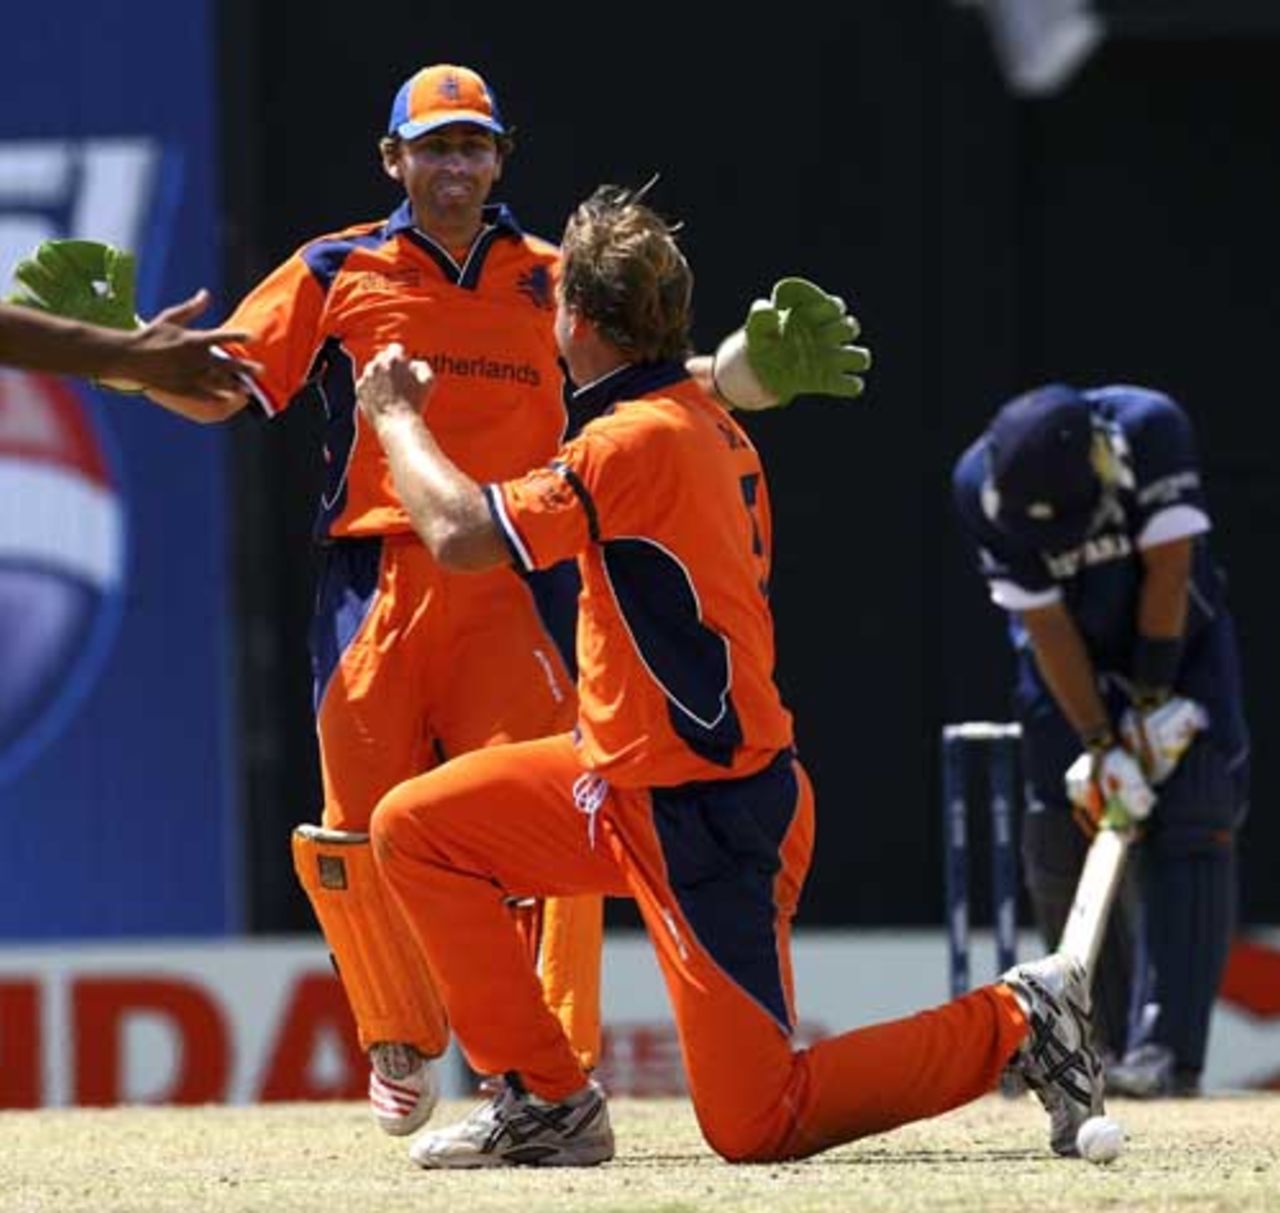 Tim de Leede pulls off a stunning return catch and Ryan Watson can't believe his luck after striking the ball so firmly, Netherlands v Scotland, Group A, St Kitts, March 22, 2007